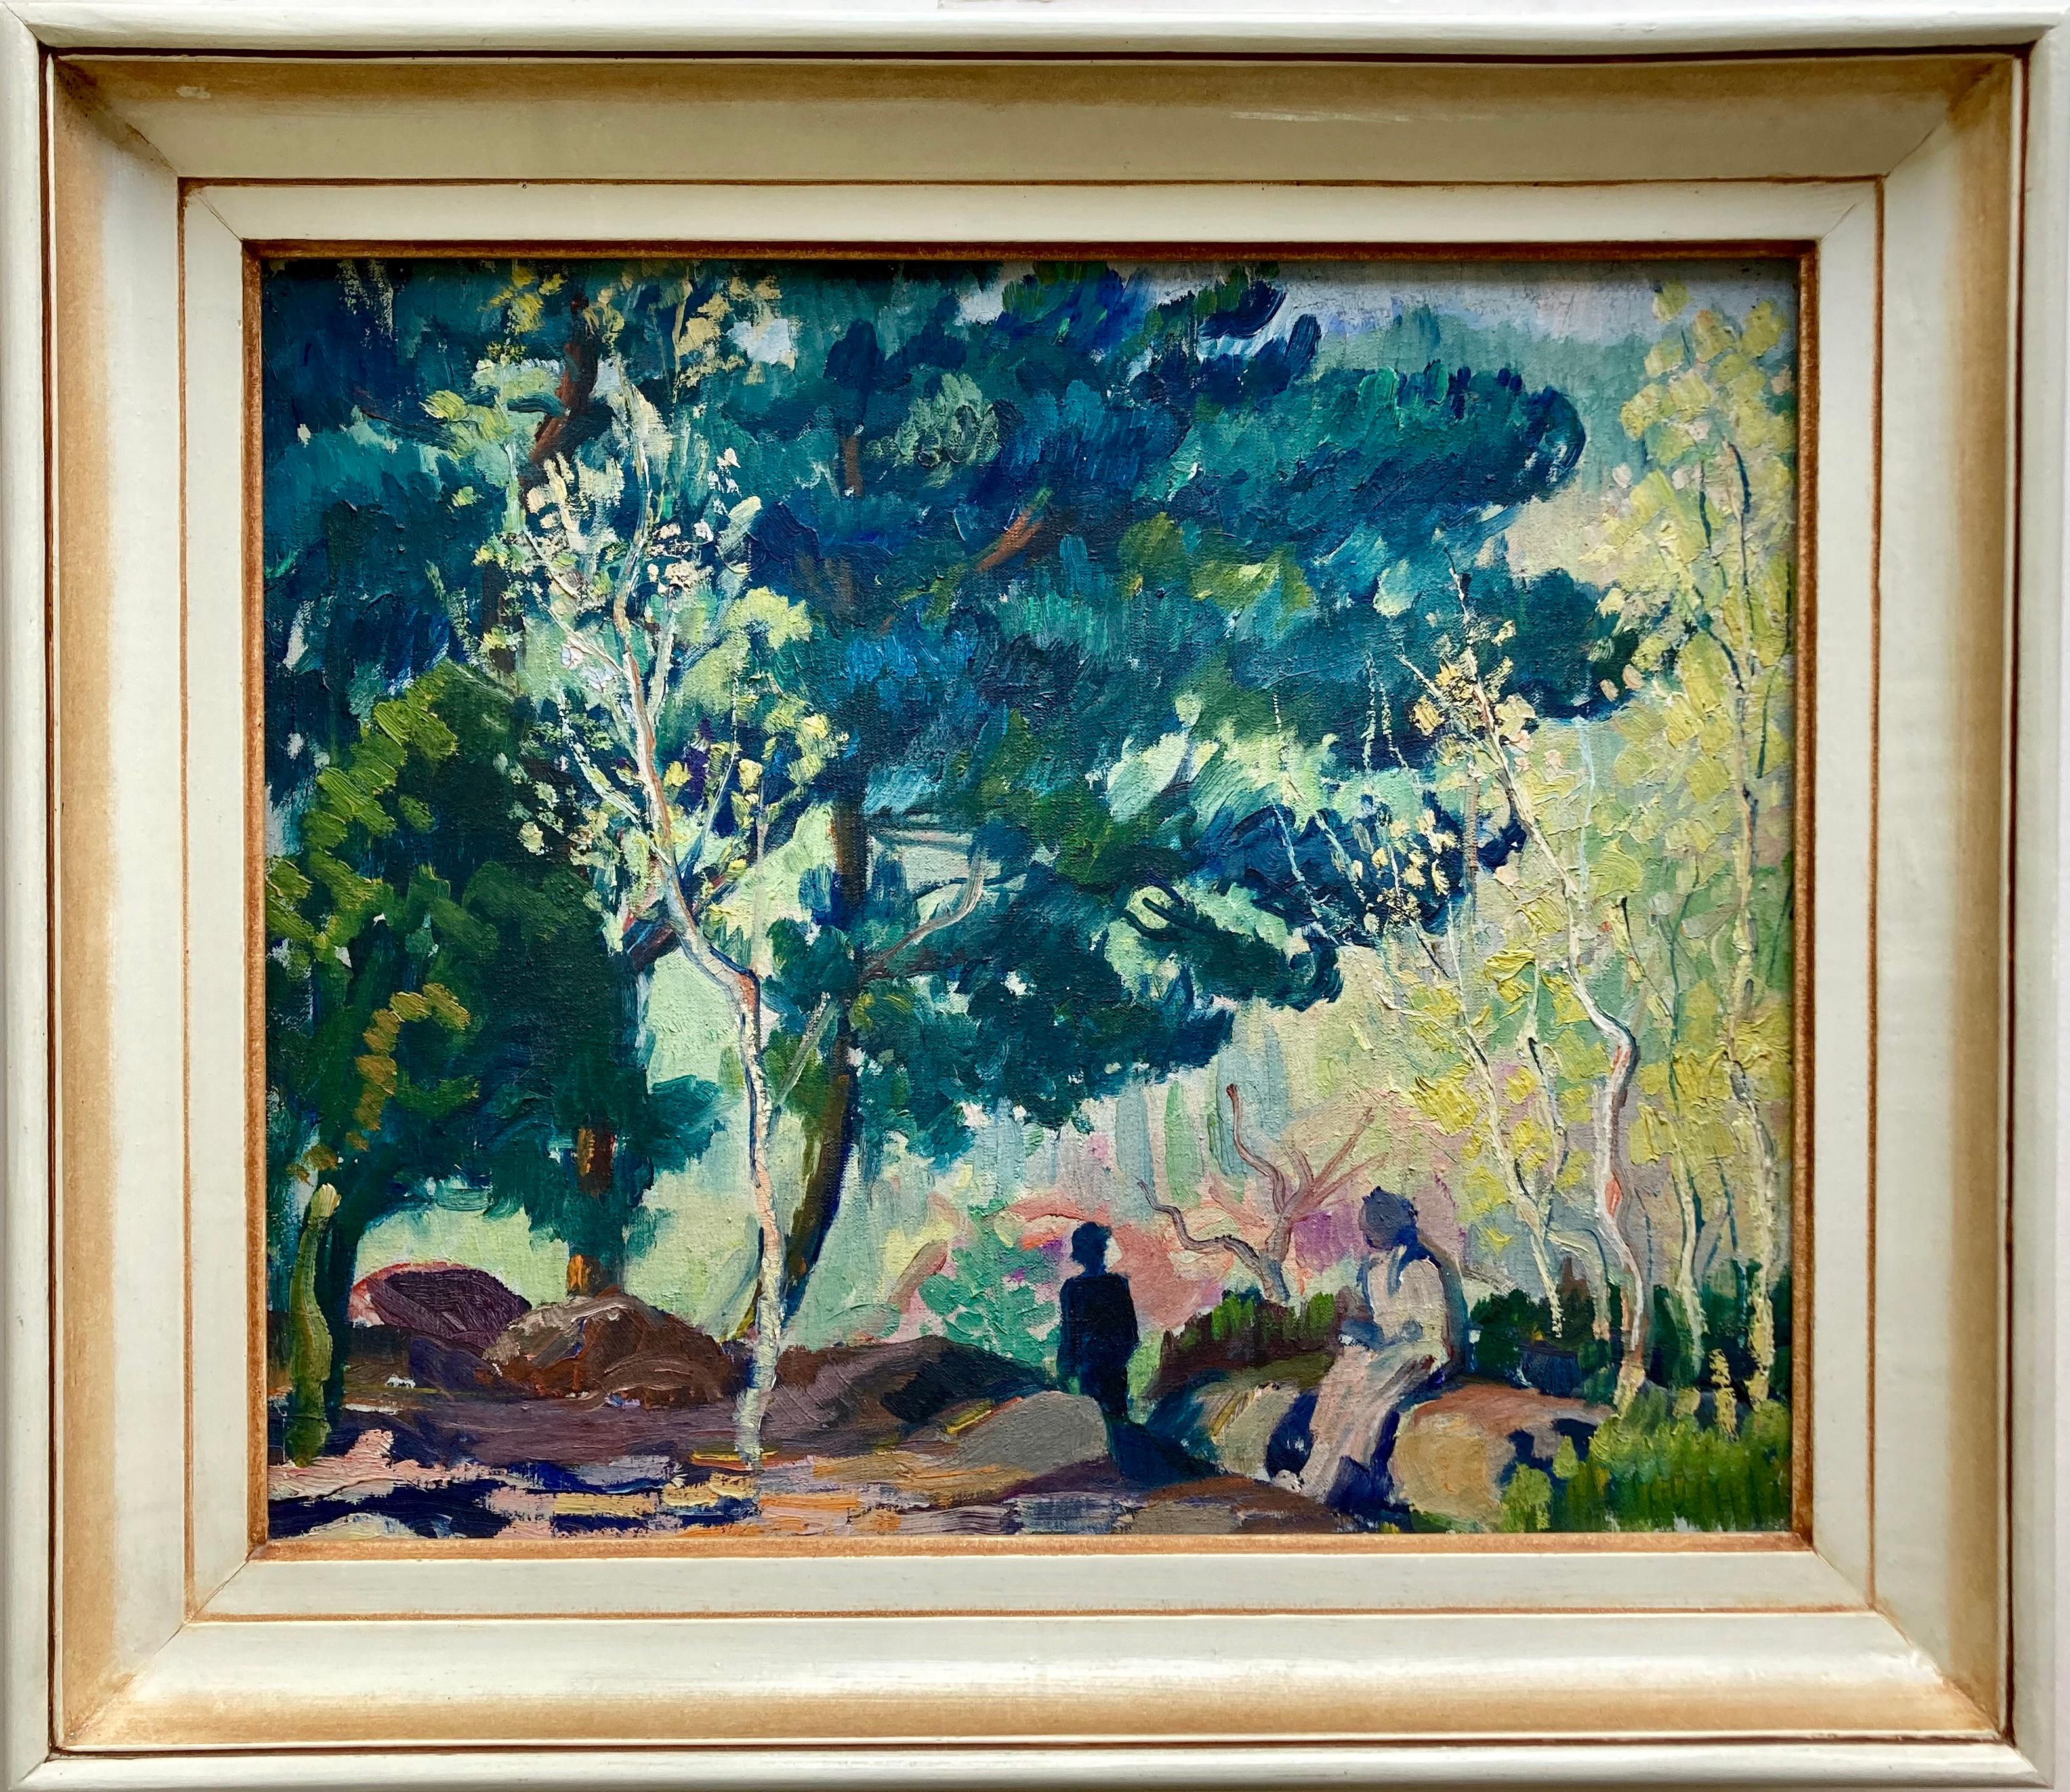 A colorful and striking piece of original art dating from around the 1940/50s. This oil painting on stretched canvas has been sourced in France. Unfortunately, the artist, evidently very skilled, has not signed nor dated his/her piece. Clearly